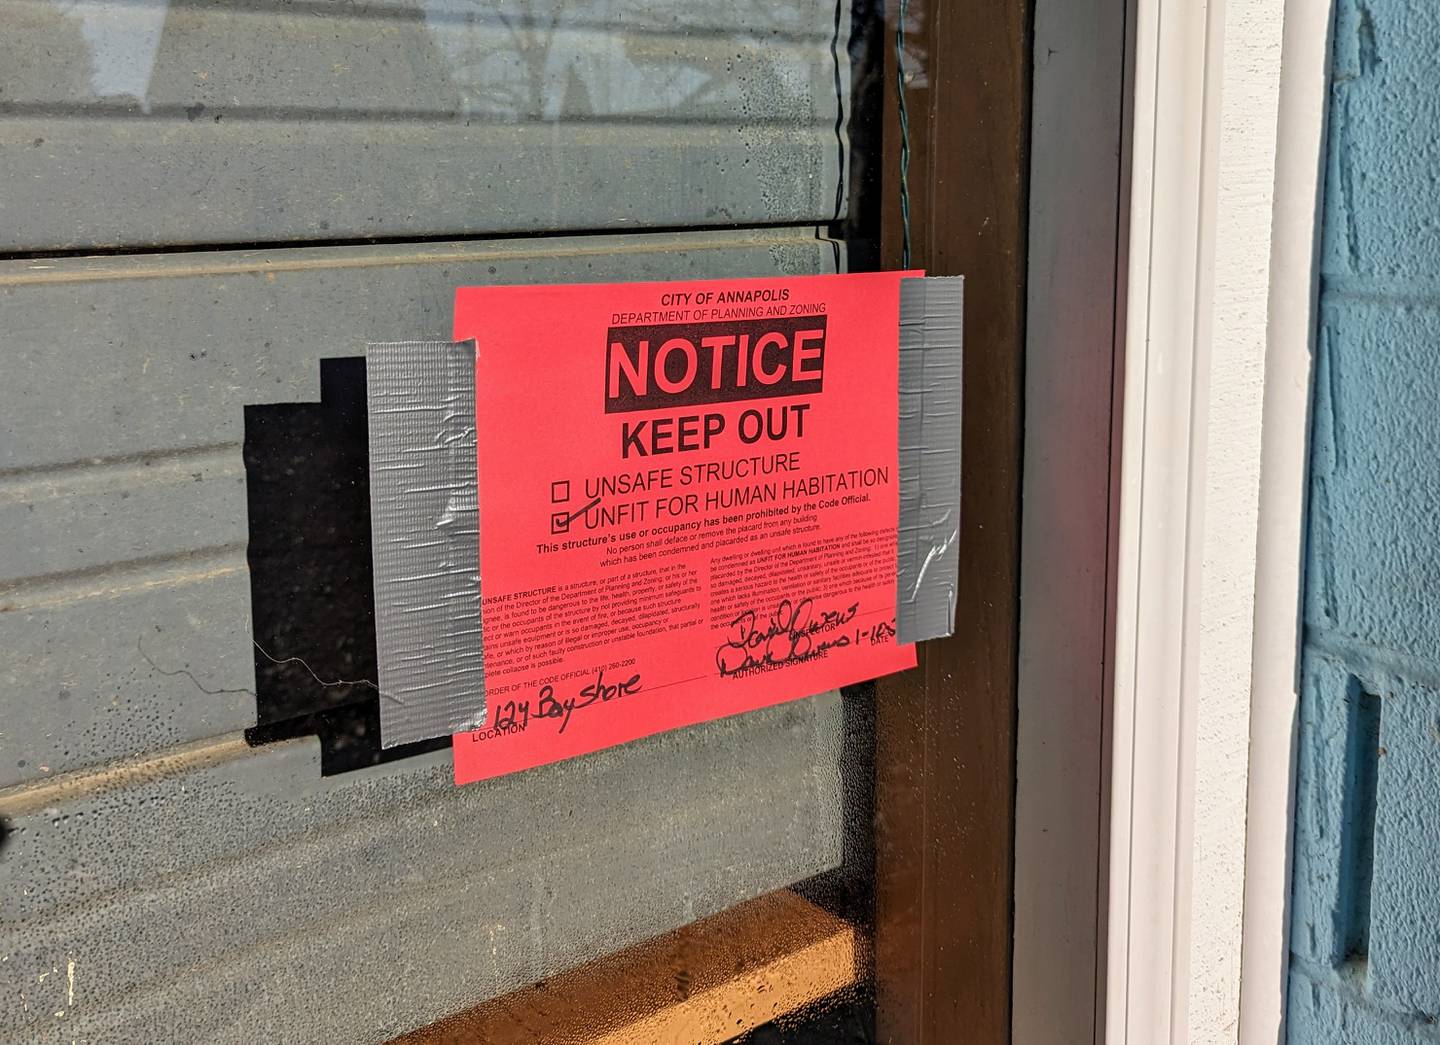 Annapolis issued 17 red notices, declaring buildings unsafe, after a storm surge pushed more than 5 feet of water into low lying areas on Jan. 10.